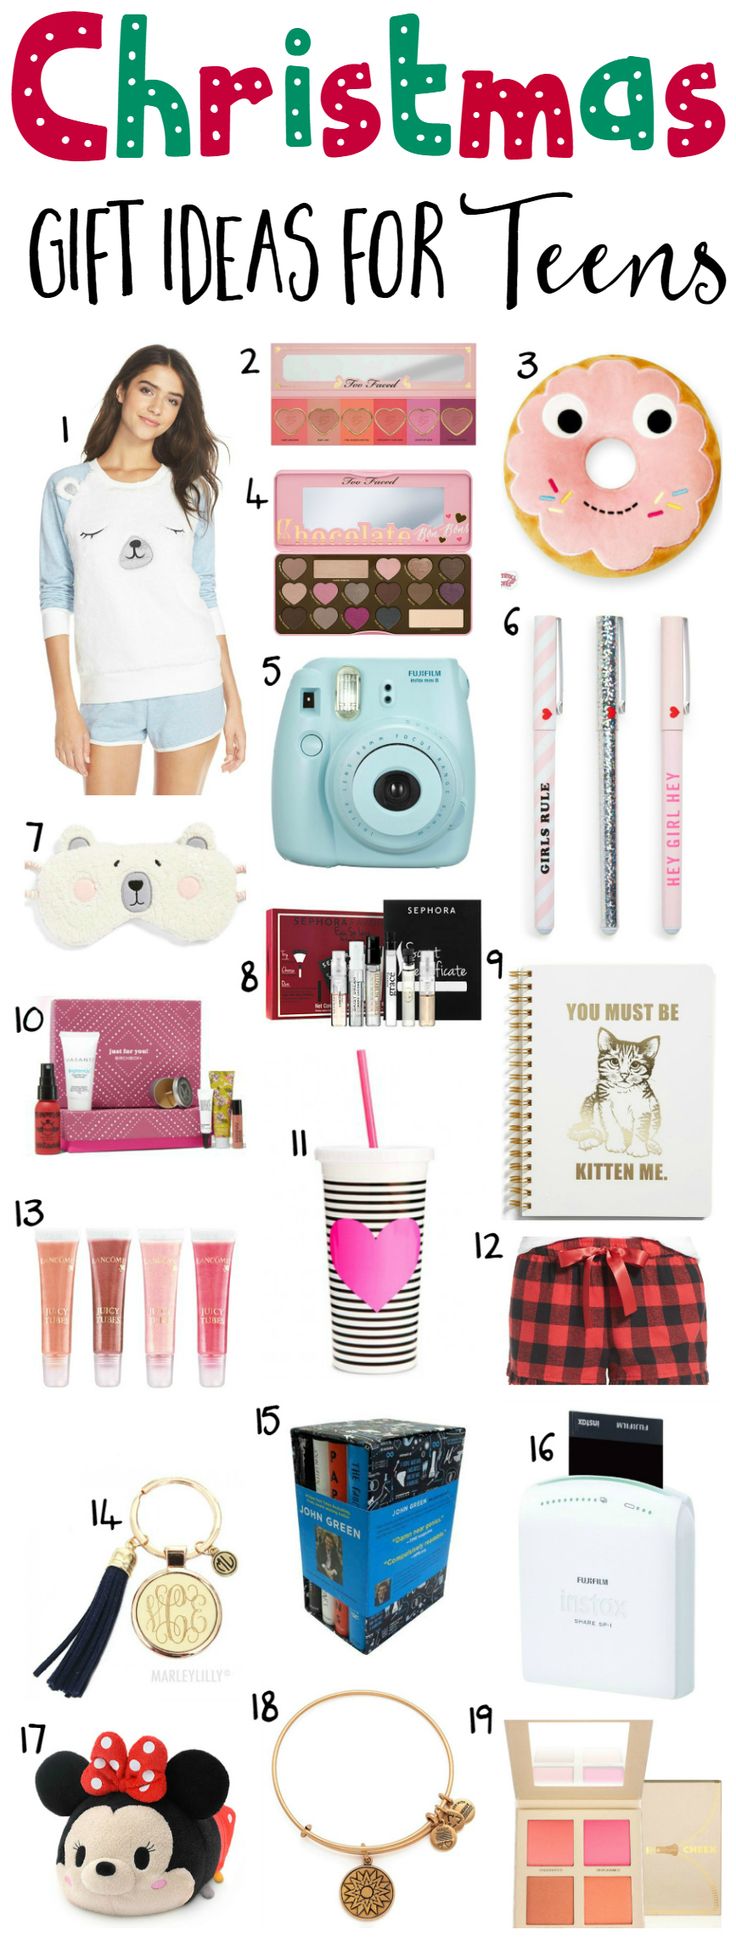 This post features over 30 of the BEST Christmas gift ideas for teens!